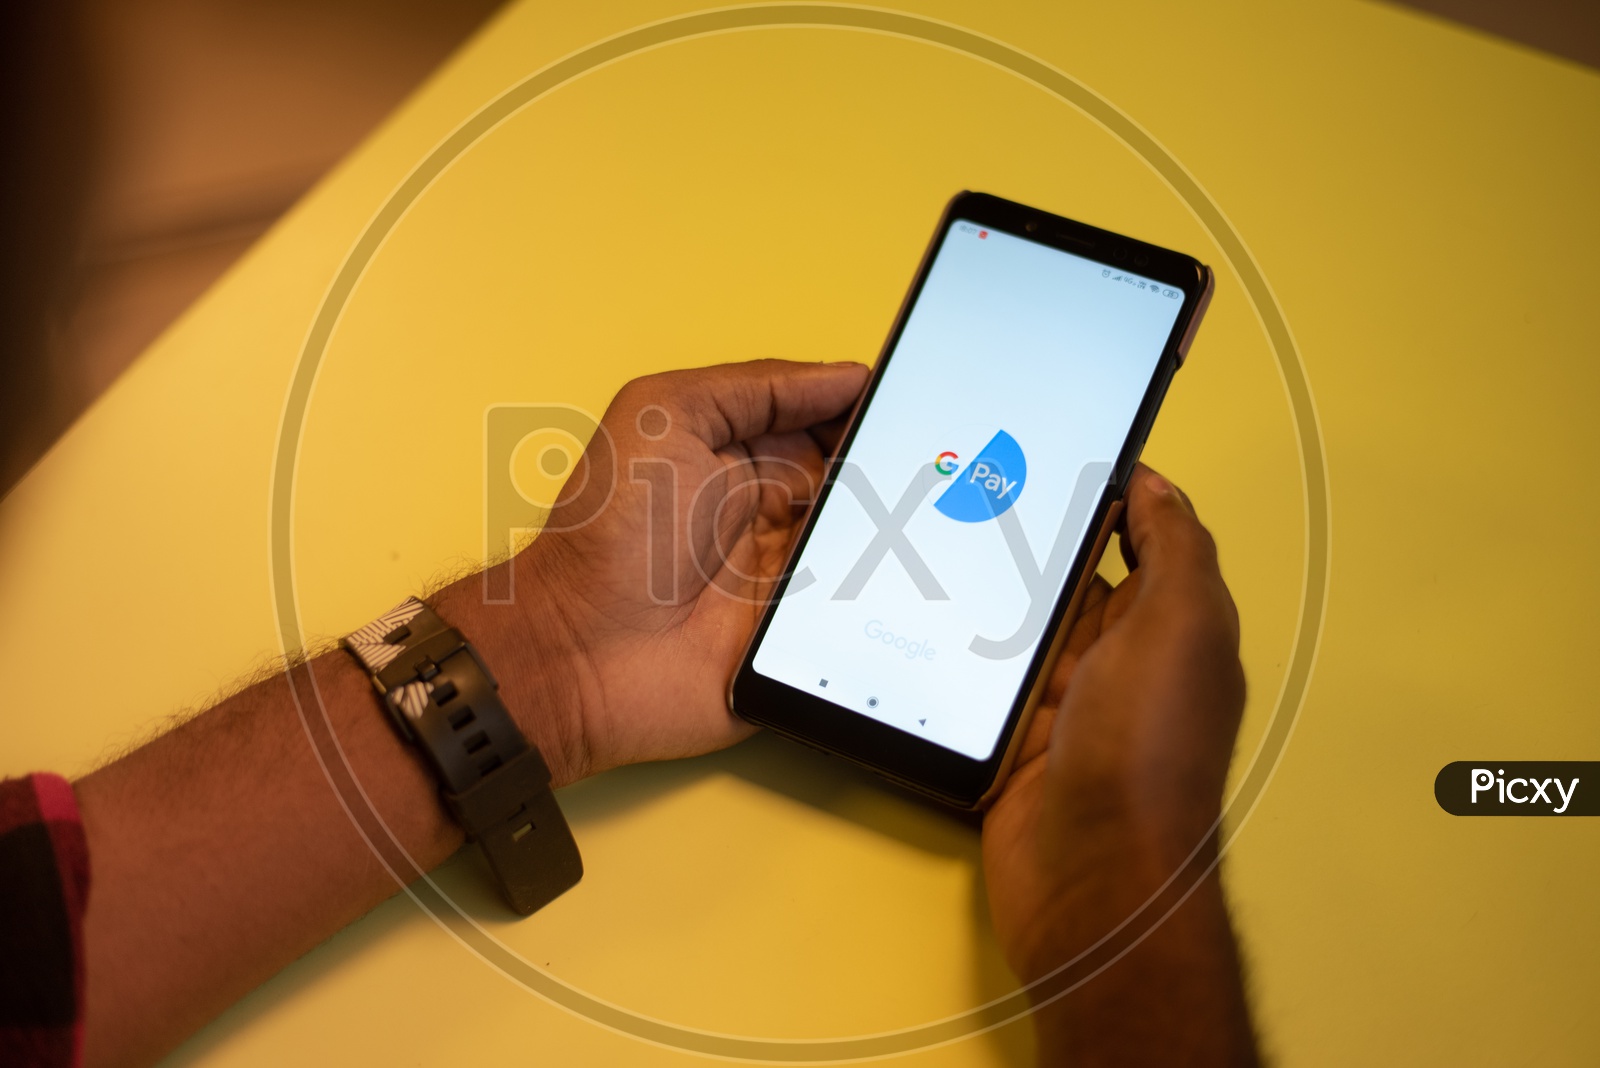 Google Pay or Tez, a Mobile Banking Payments wallet app